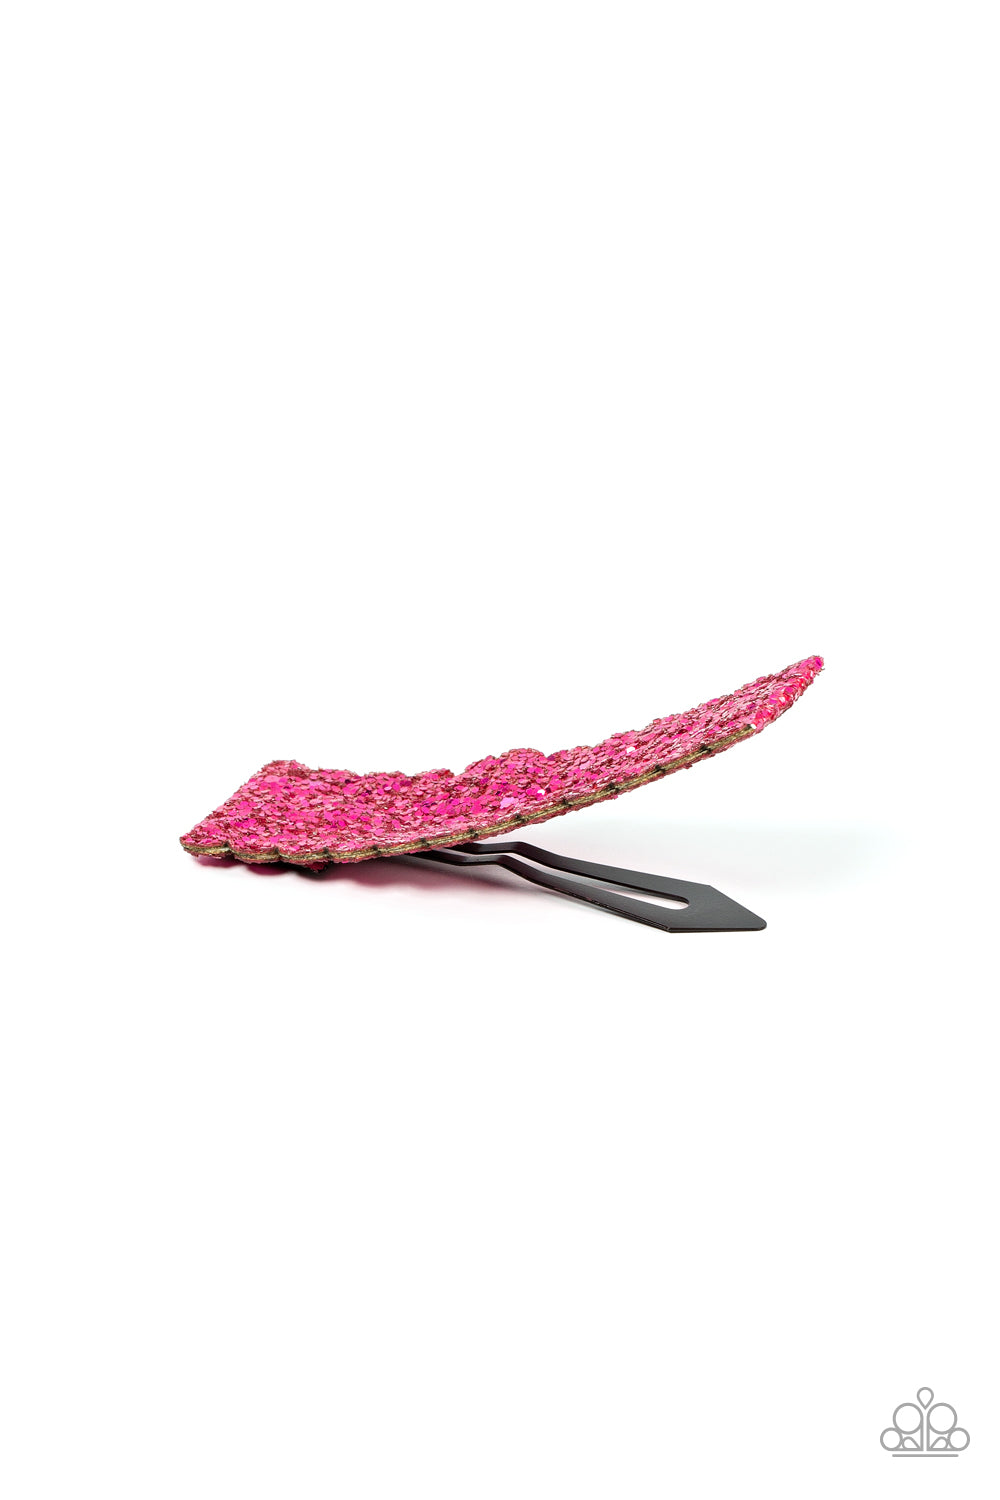 Shimmery Sequinista Pink Hair Clip - Paparazzi Accessories  The front of a scalloped leather frame is dusted in glittery Fuchsia Fedora sequins, resulting in a vibrant sparkle. Features a standard snap hair clip on the back.  Sold as one individual hair clip.